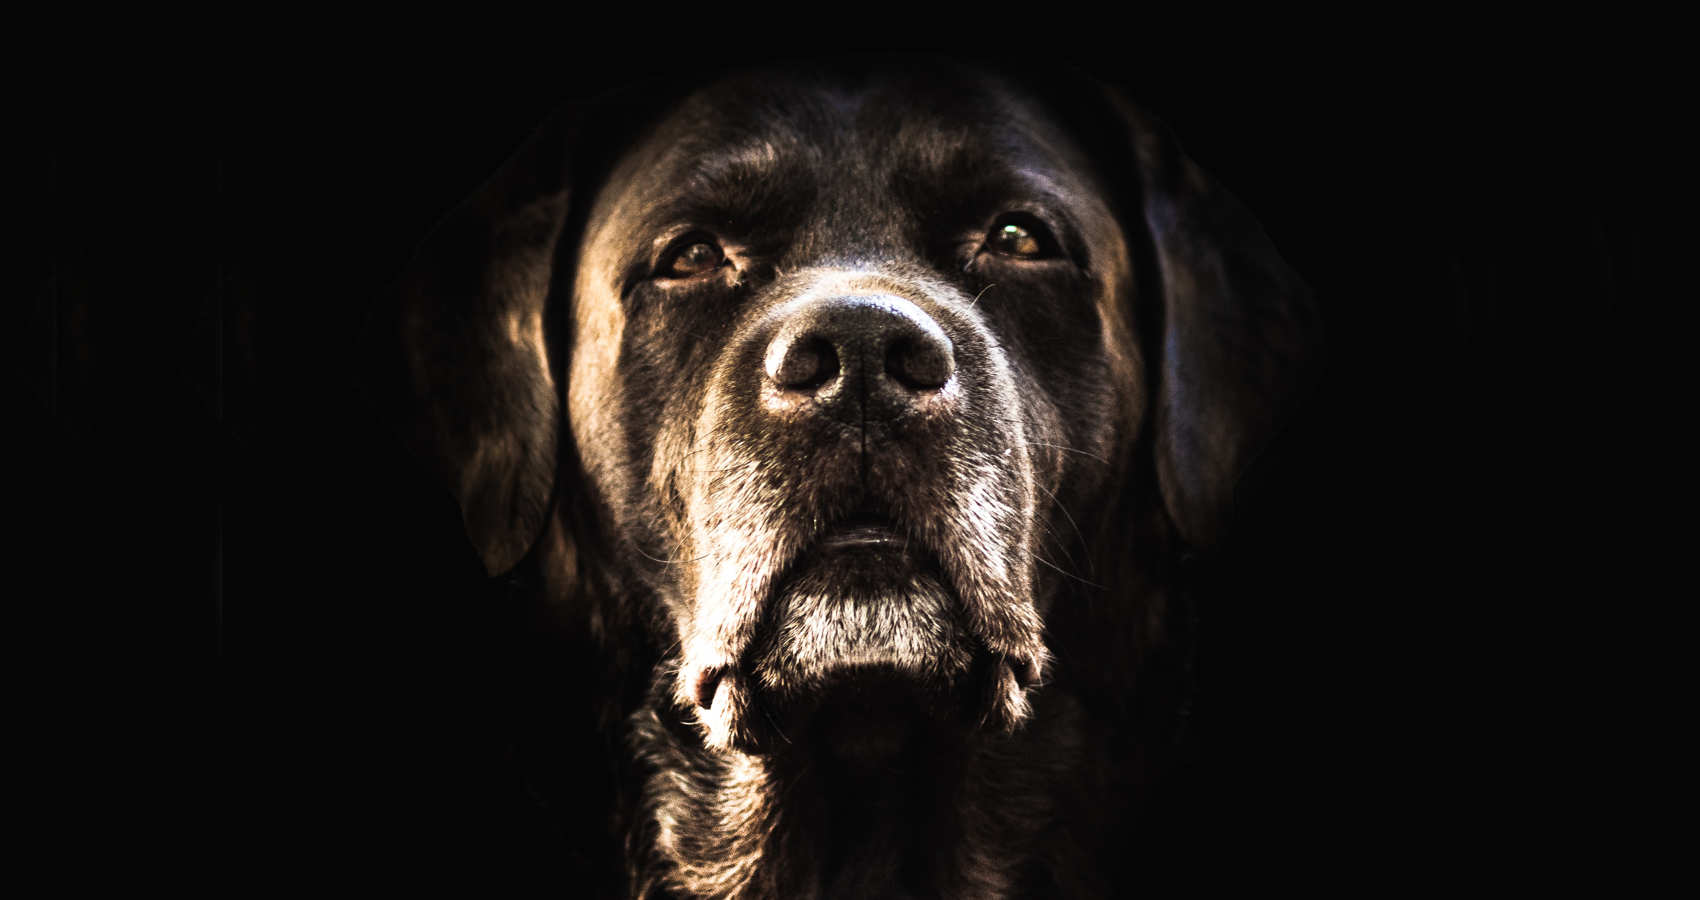 The Black Dog, poetry by Nobby66 at Spillwords.com